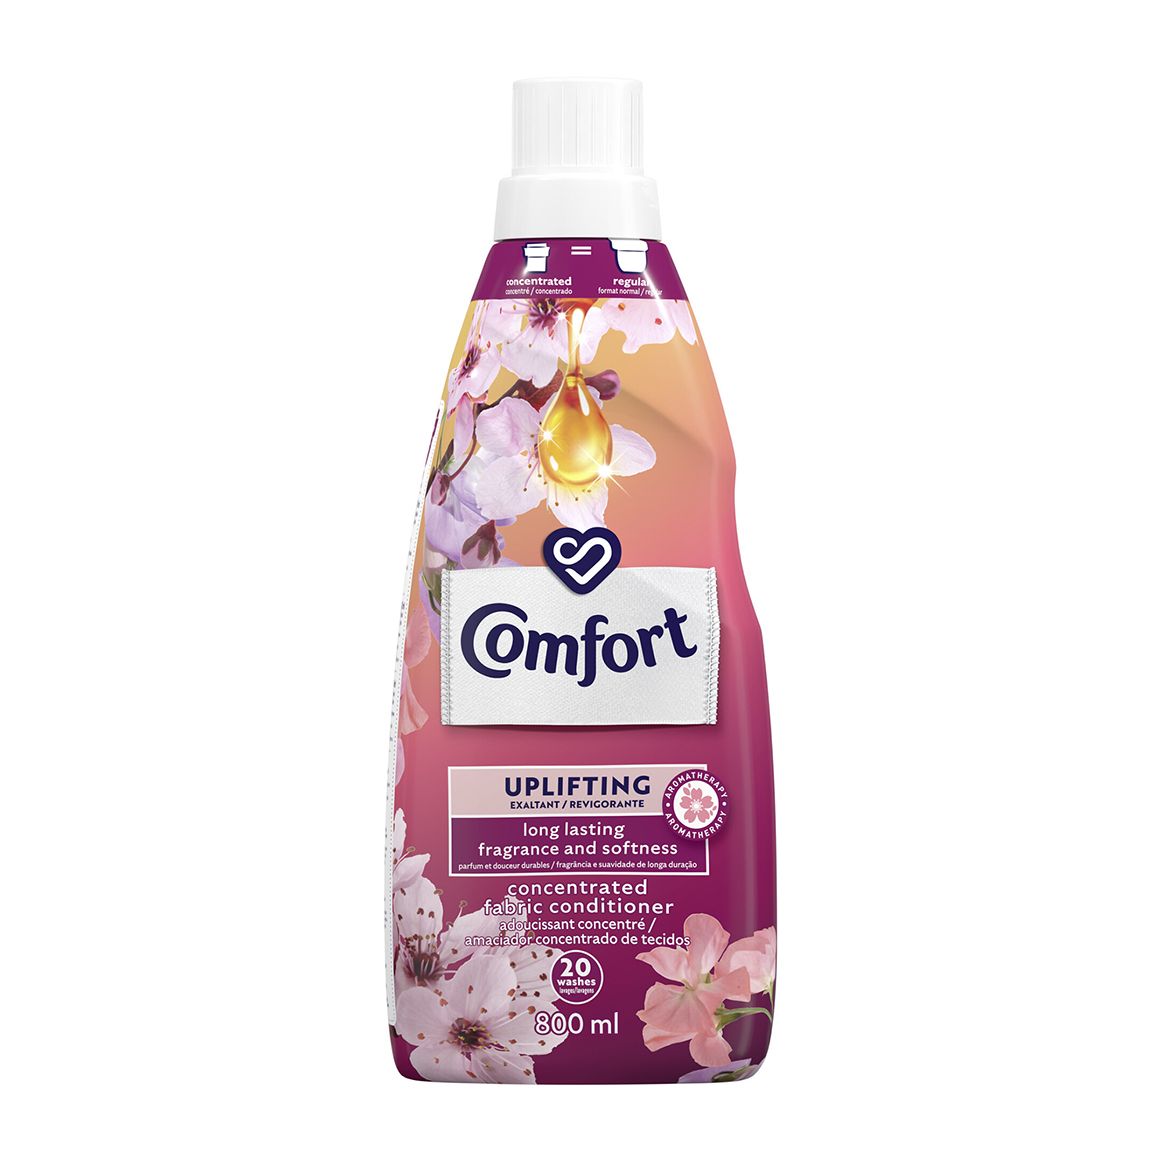 COMFORT Uplifting Concentrated Fabric Conditioner 800ml (Pack of 12 ...